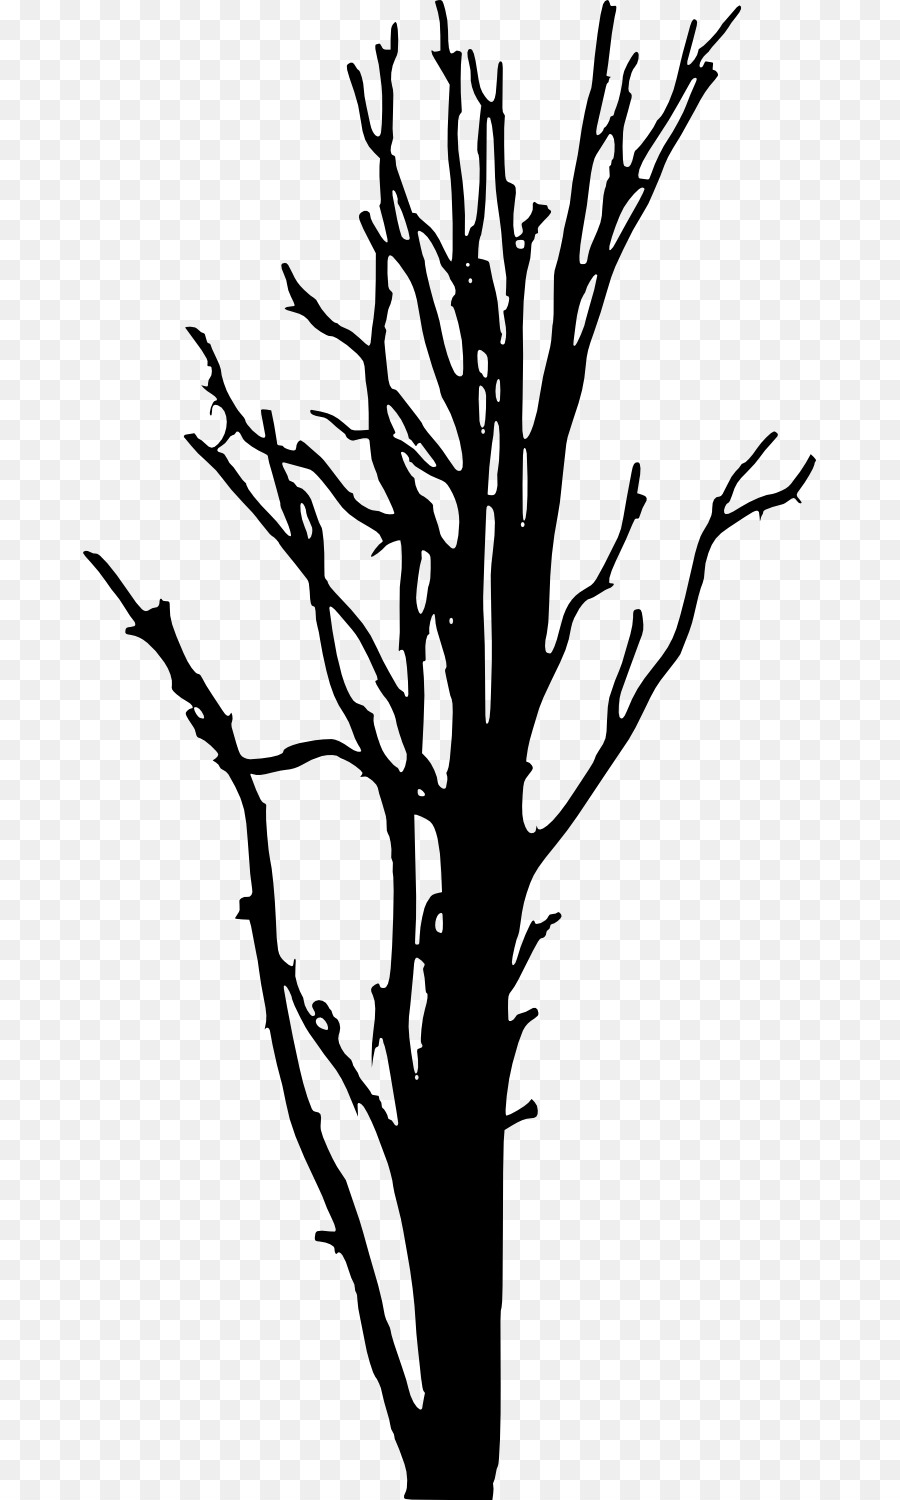 Woody plant Tree Silhouette Clip art - dead tree png download - 733*1500 - Free Transparent Woody Plant png Download.